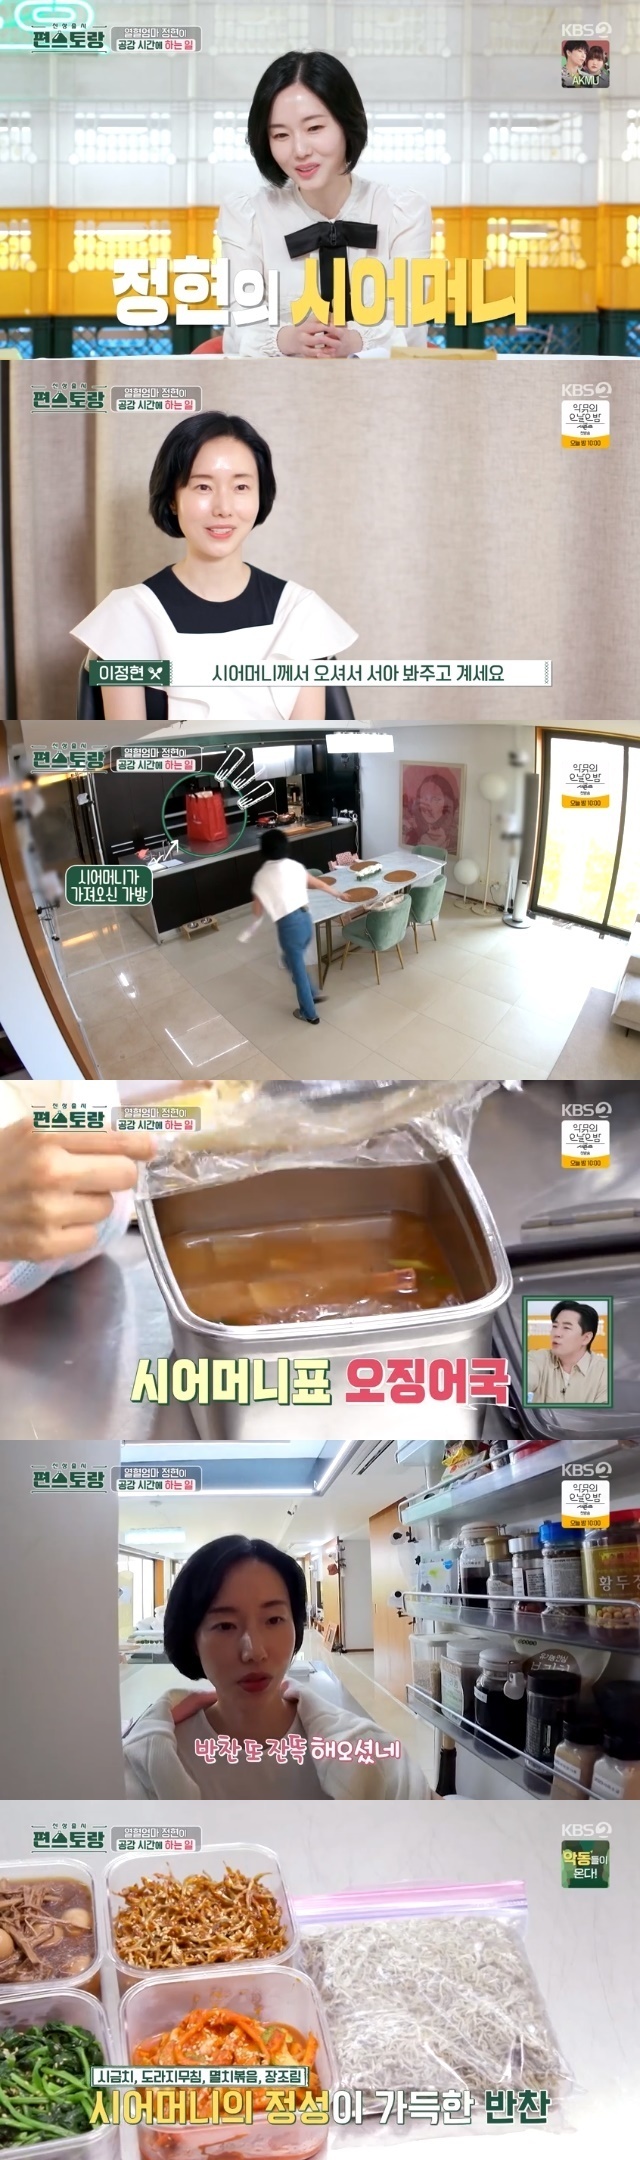 Actor Lee Jung-hyun shows off love of mother-in-lawIn the 191st KBS 2TV entertainment Stars Top Recipe at Fun-Staurant (hereinafter Stars Top Recipe at Fun-Staurant) broadcasted on September 1, Lee Jung-hyun went to graduate school, .On this day, Lee Jung-hyun revealed that he was going back to graduate school to become a film director, and he was studying at a graduate school.This is to get her daughter SeoAs rice. The house is right next to the school, so she is taking care of her rice all the time.Lee Jung-hyun said, Our mother-in-law, Lee Jung-hyun said, I am so glad that mother-in-law lives nearby.When I go to school or when something urgent happens, I come and look. Lee Jung-hyun, who went to the kitchen to cook SeoA rice, was delighted to find mother-in-laws side dishes.Lee Jung-hyun said, I can not eat our groom. I like it very much.Mother-in-law always likes Daughter-in-law. Lee Yeon-bok said, I can not eat my son, but its great to have Daughter-in-law. Meanwhile, Lee Jung-hyun married Park Yoo-jung, an ankle joint specialist in orthopedic surgery, in April 2019, and got a daughter SeoA at the age of 43 in April 2022.Lee Jung-hyuns father-in-law is also a foot ankle joint specialist.